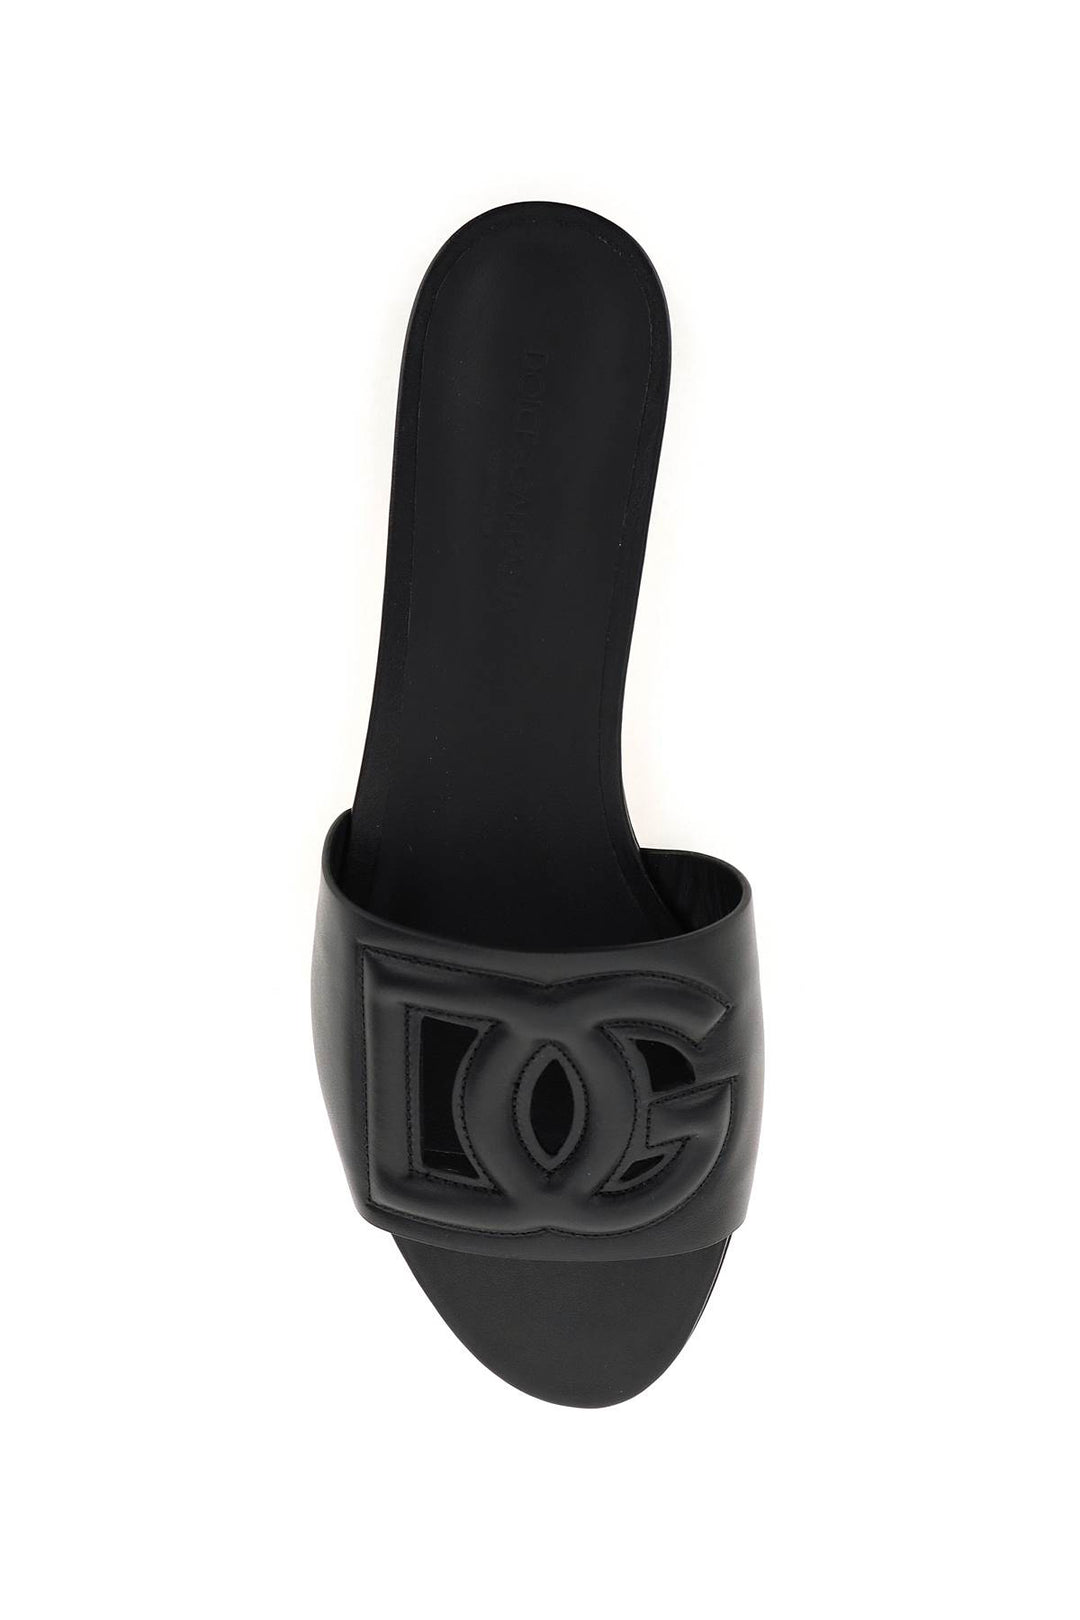 Dolce & Gabbana Leather Slides With Cut Out Logo   Black